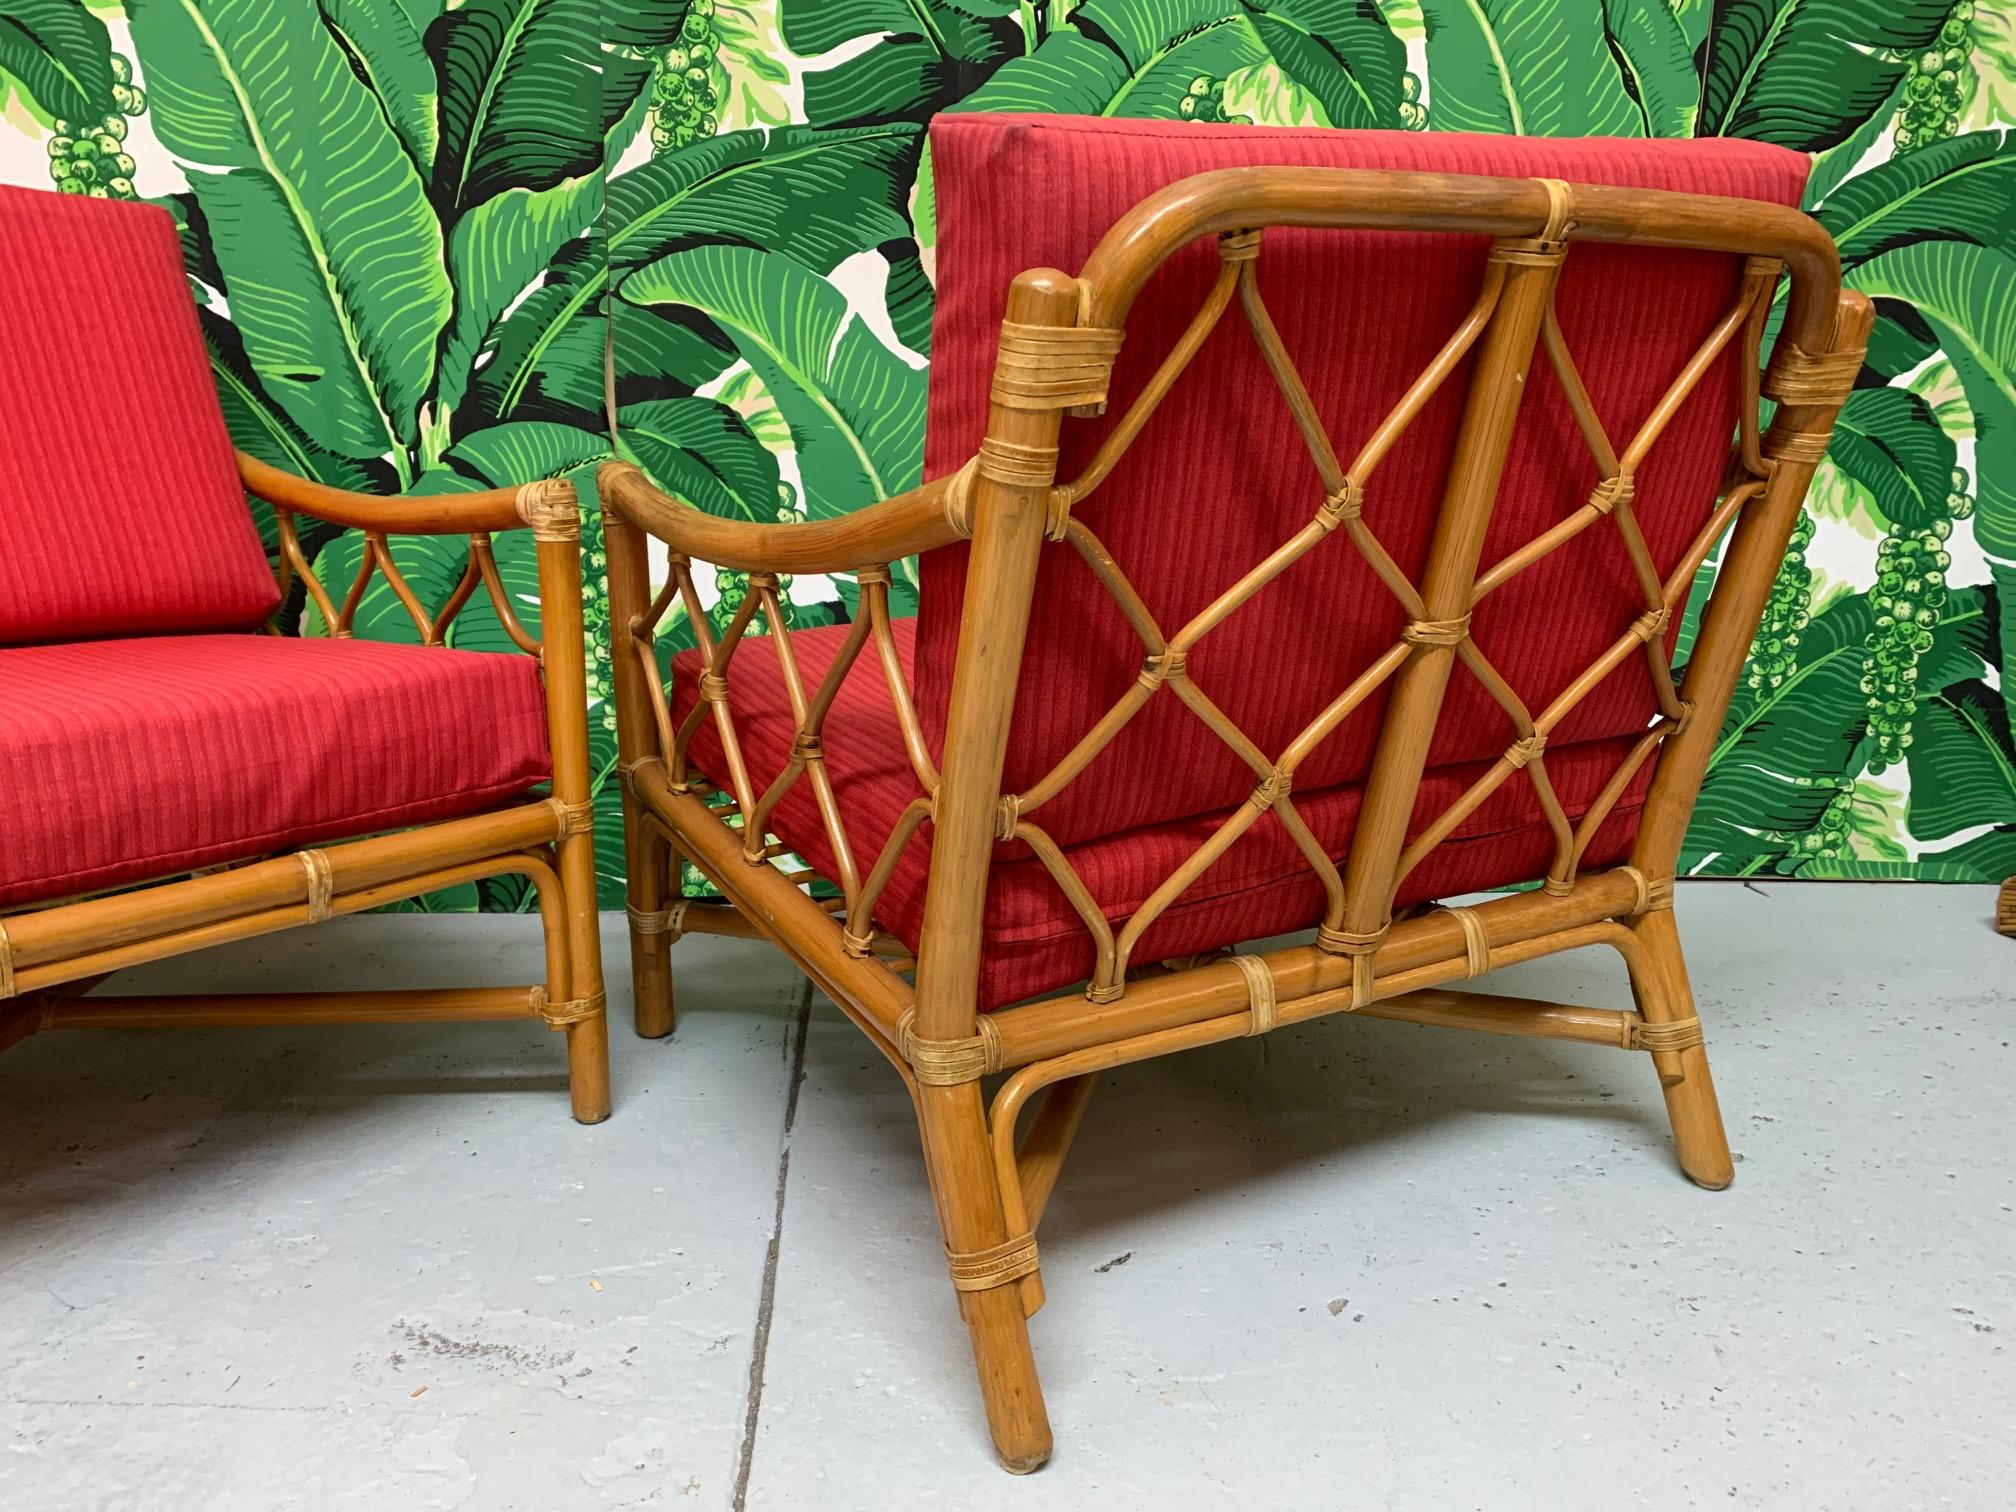 Pair of rattan lounge chairs feature leather wrapped joints and cross-hatch rattan detailing. Cushions are upholstered in an indoor/outdoor fabric. Very good vintage condition, minor imperfections consistent with age, some slight discolorations on